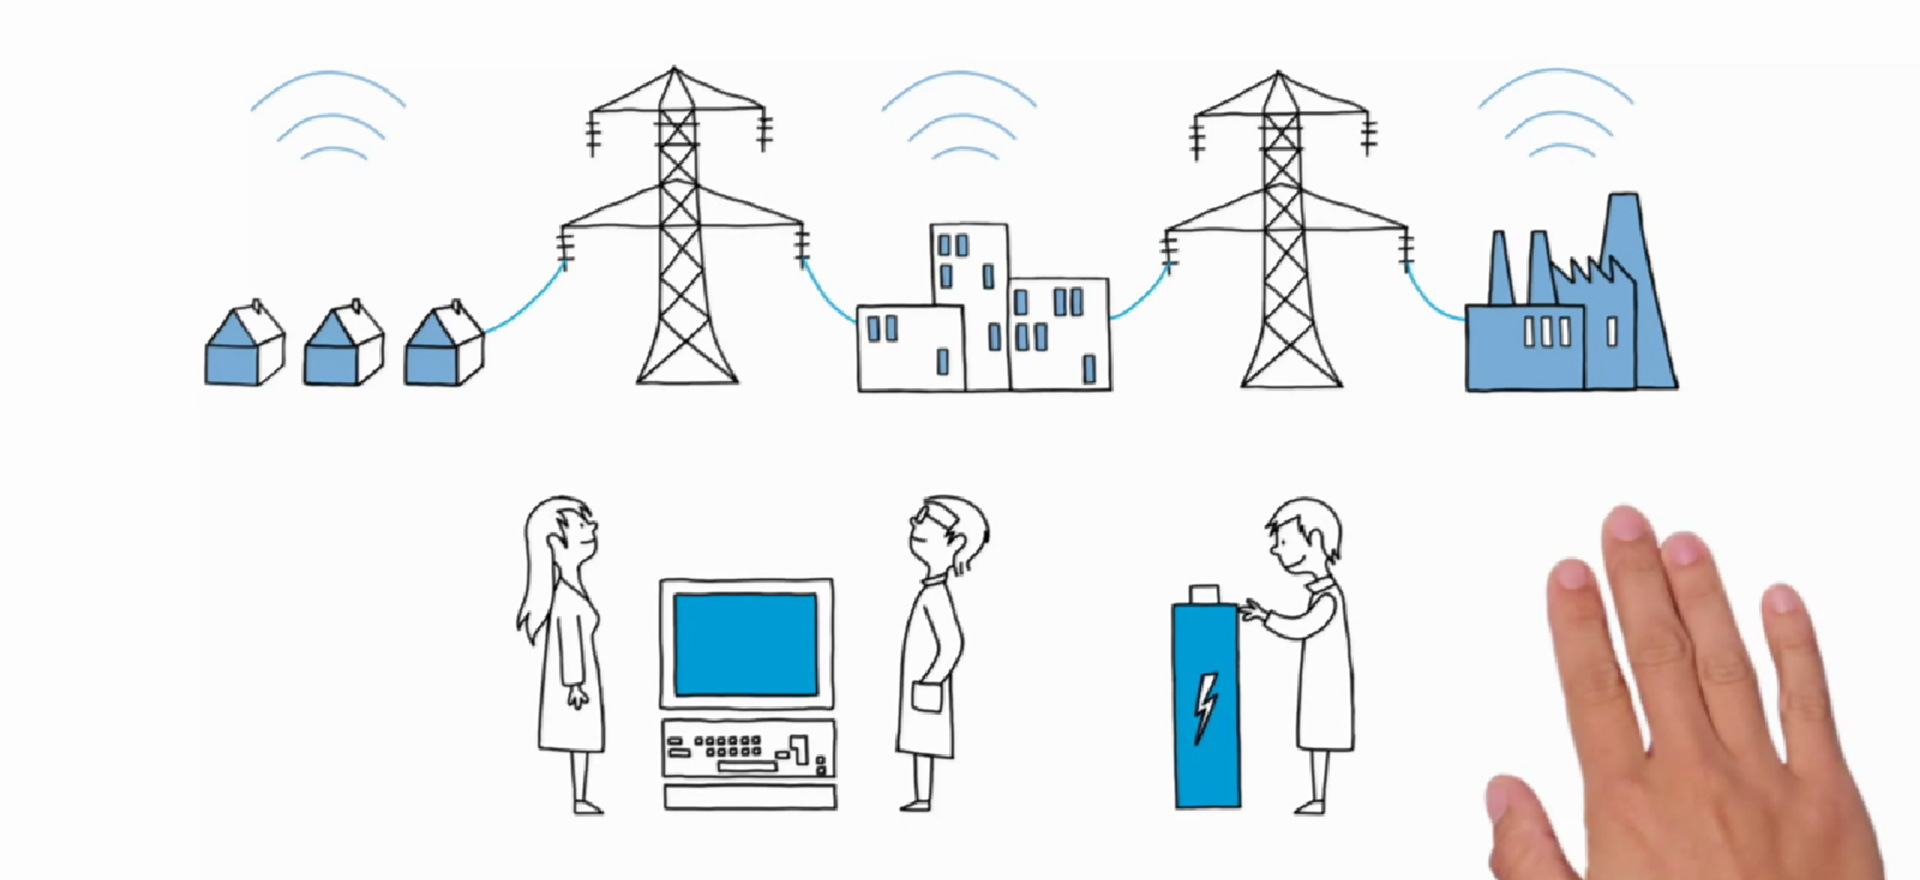 What exactly is a smart grid ?